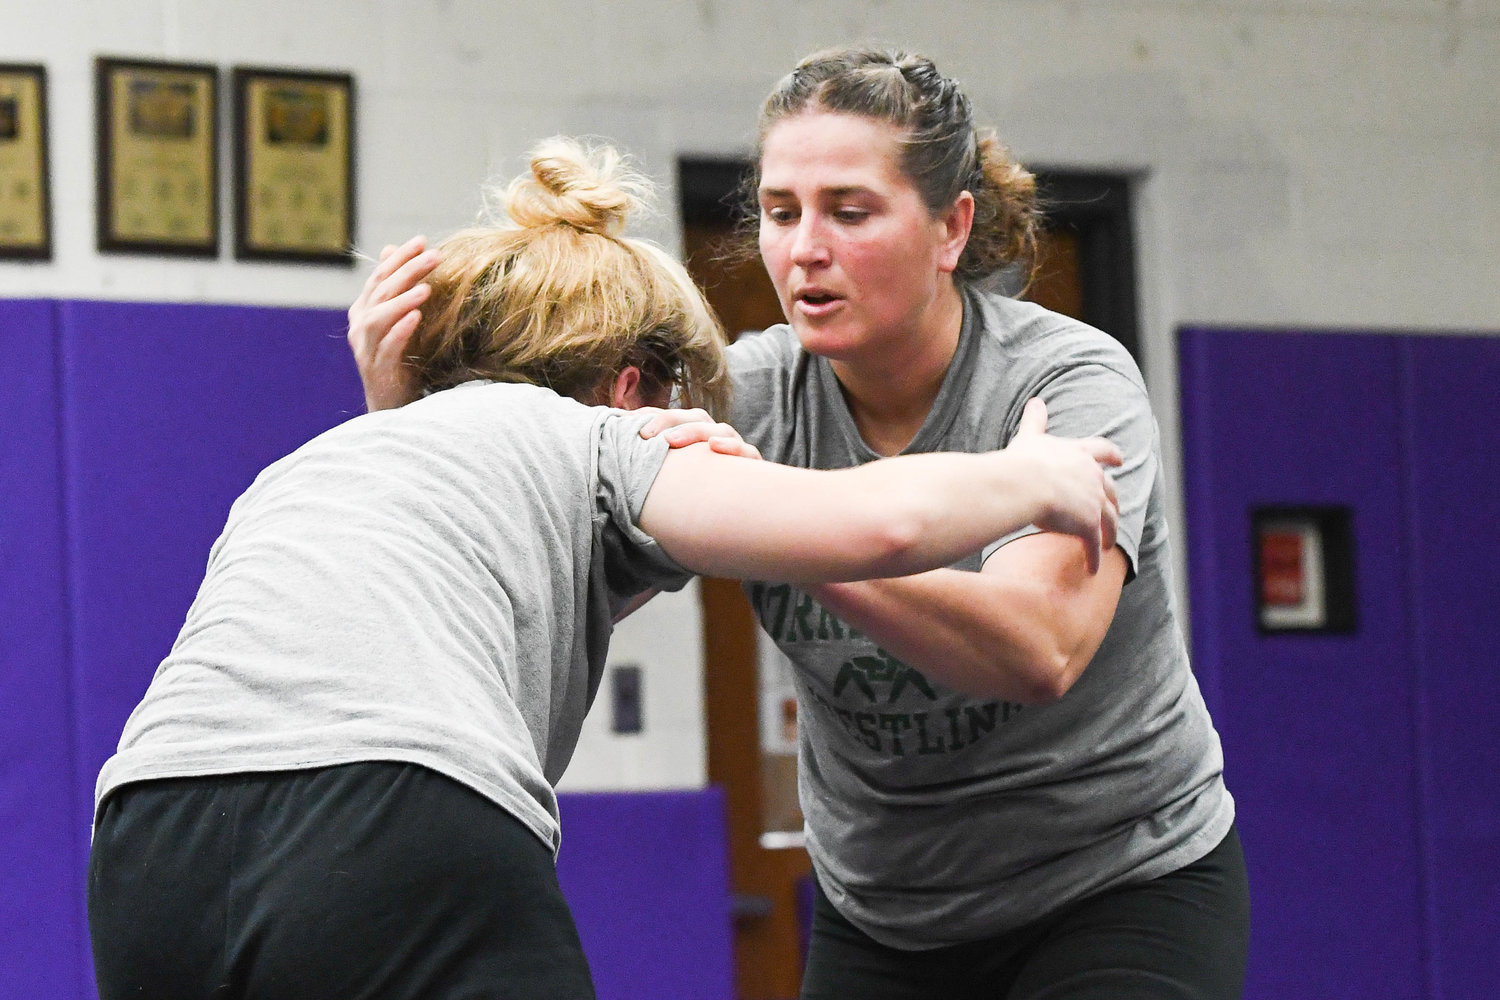 Holland Patent head coach Samantha Doxstader, right, demonstrates a move on Stephanie Grocholski during wrestling practice on Monday at Holland Patent High School.